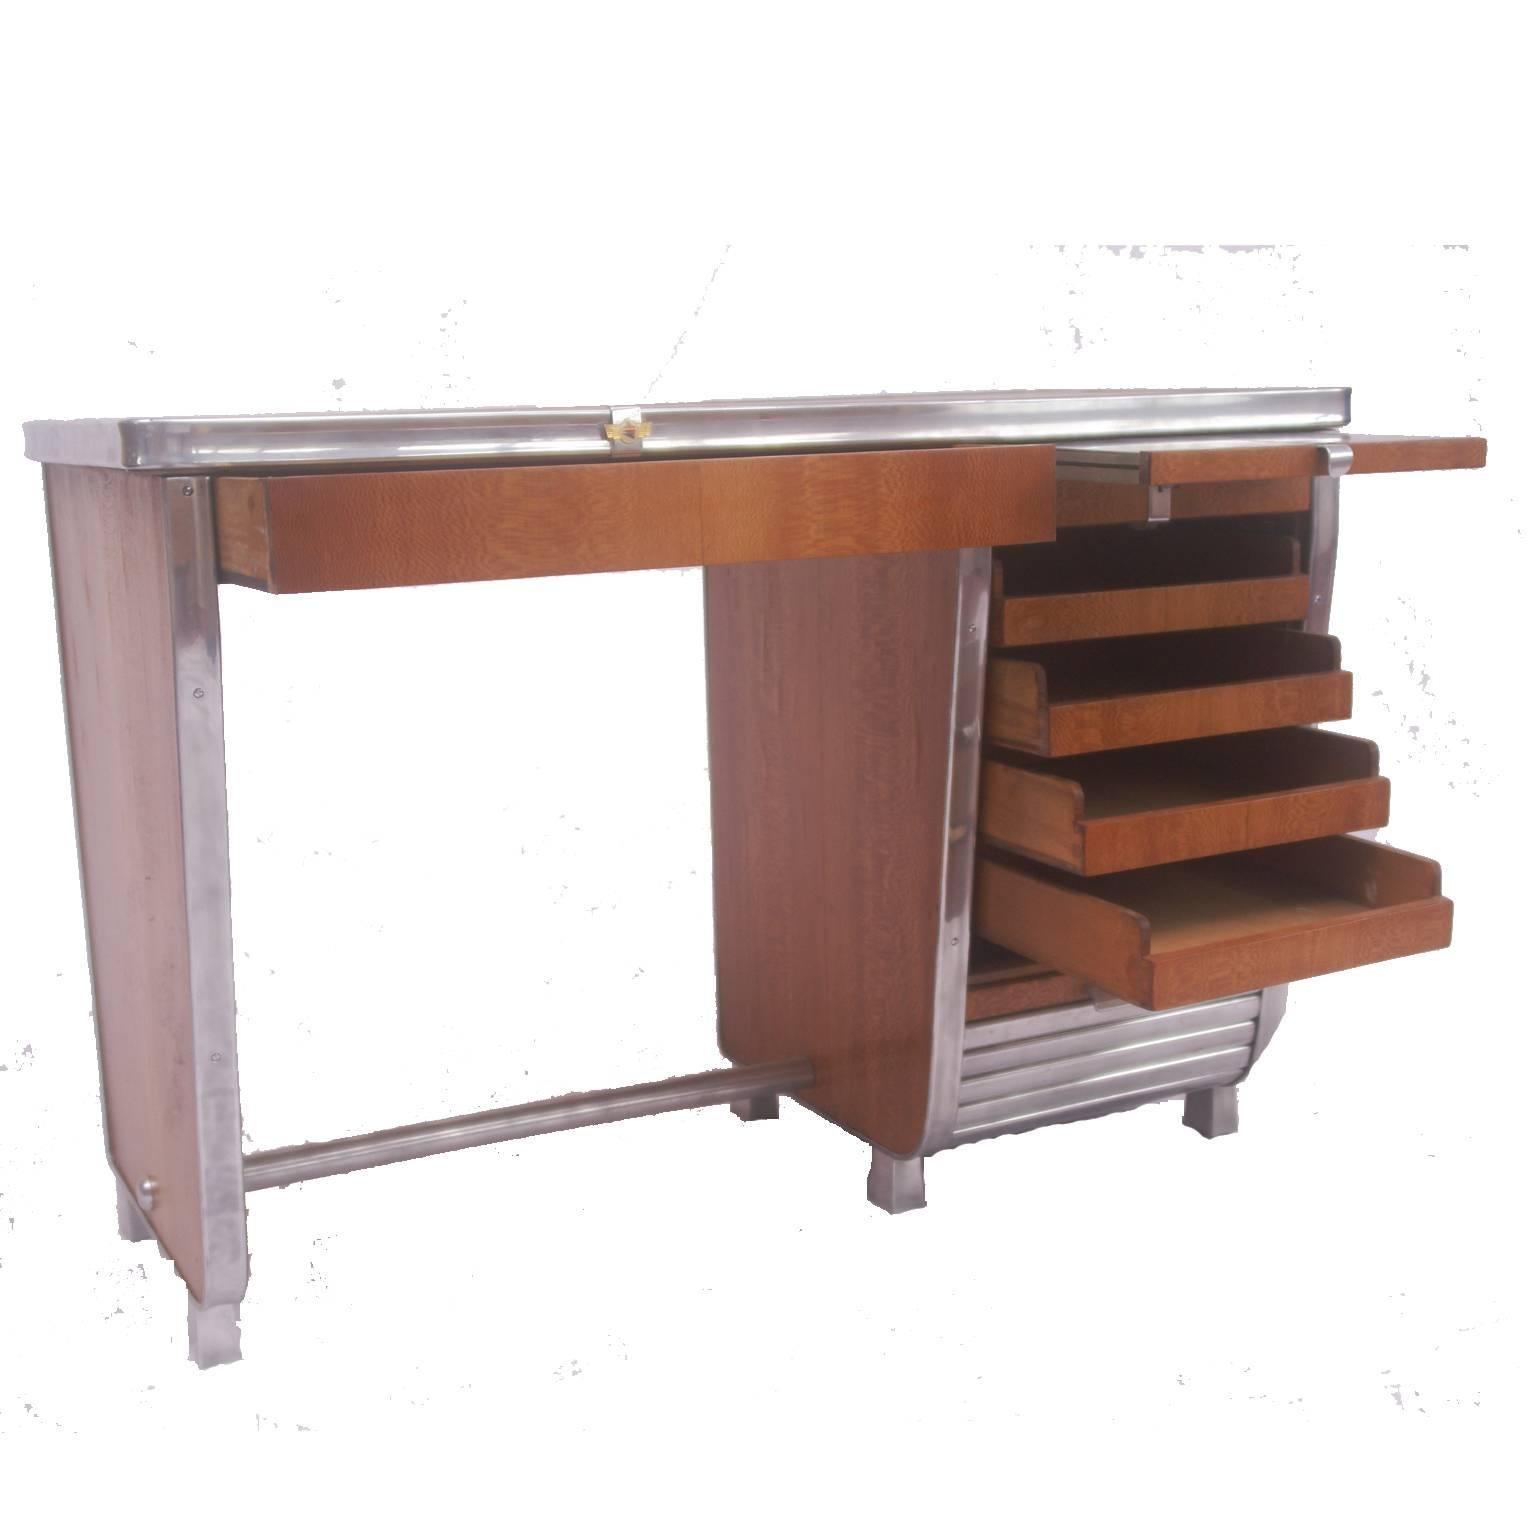 Small Art Deco desk with aluminium mounts and slatted aluminium roller front. Quarter veneered top and matched veneers throughout. The roller shutter covers four drawers, with one other drawer to front, Aluminium slide above shutter. Badge of French